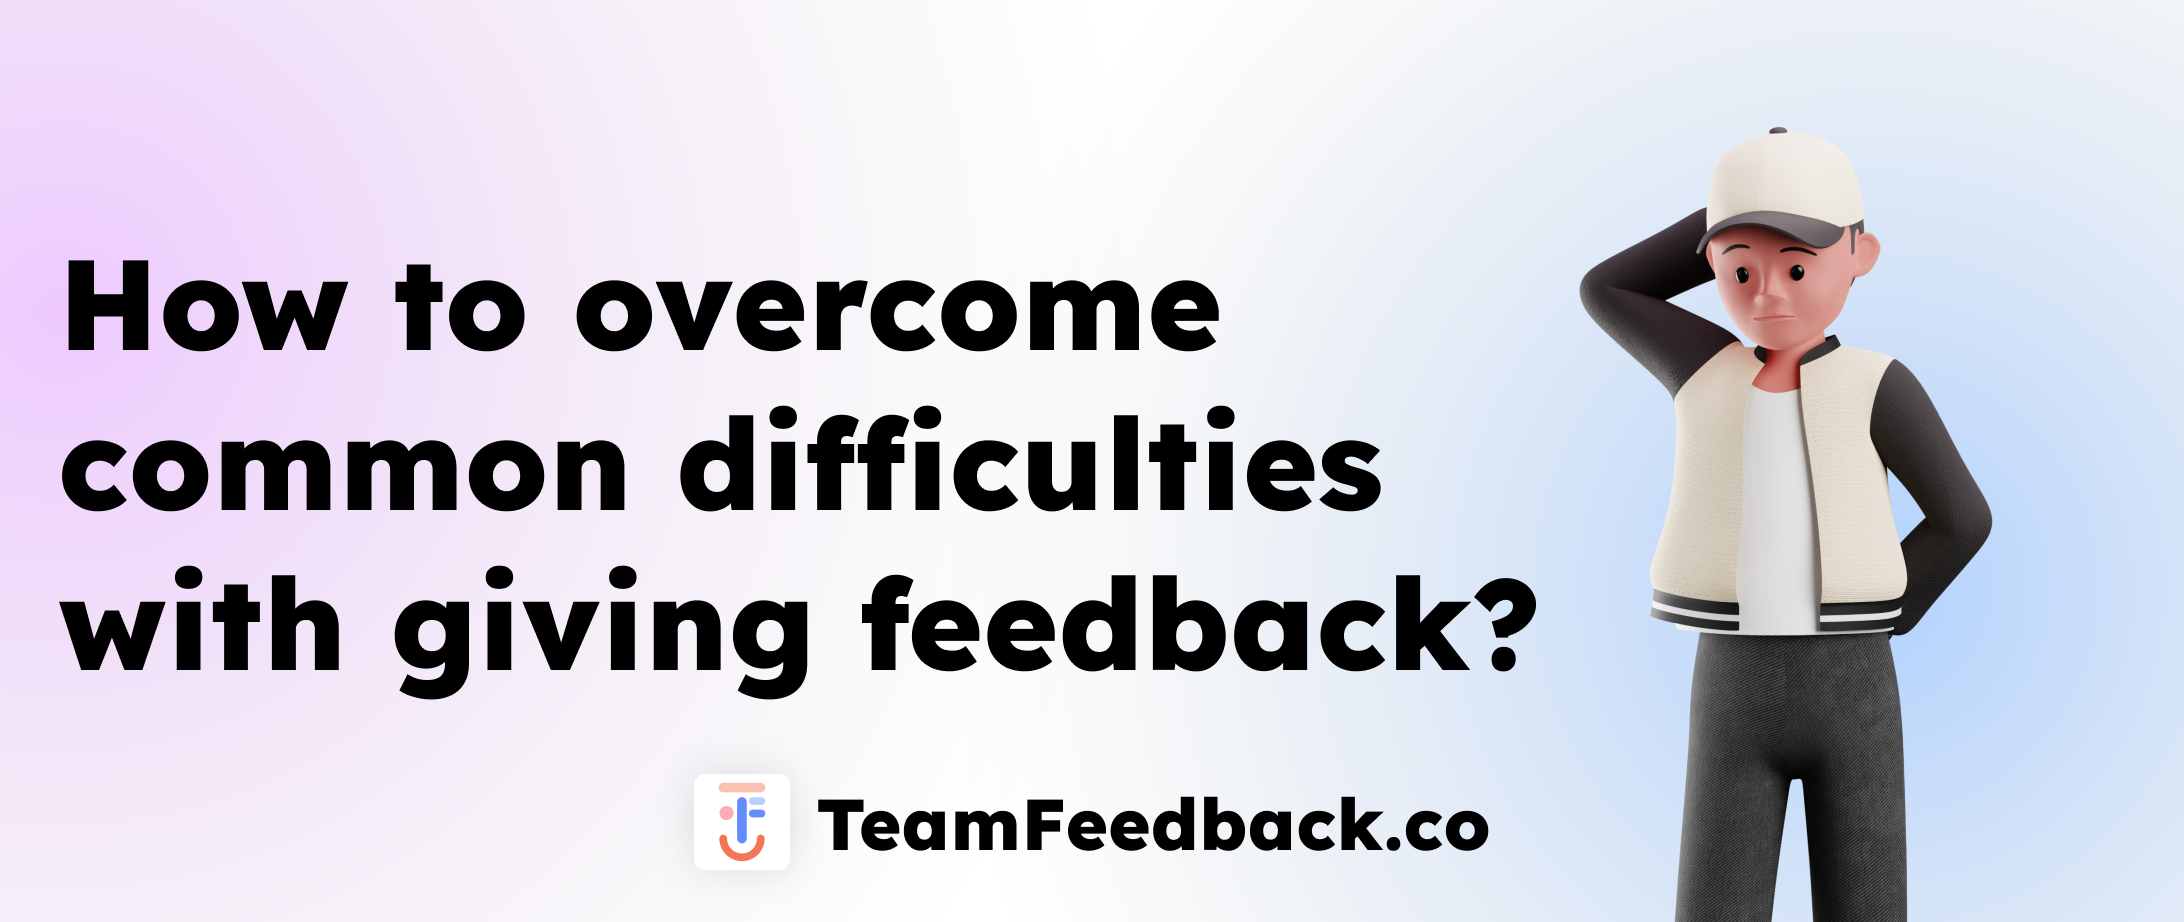 How to overcome common difficulties with giving feedback image